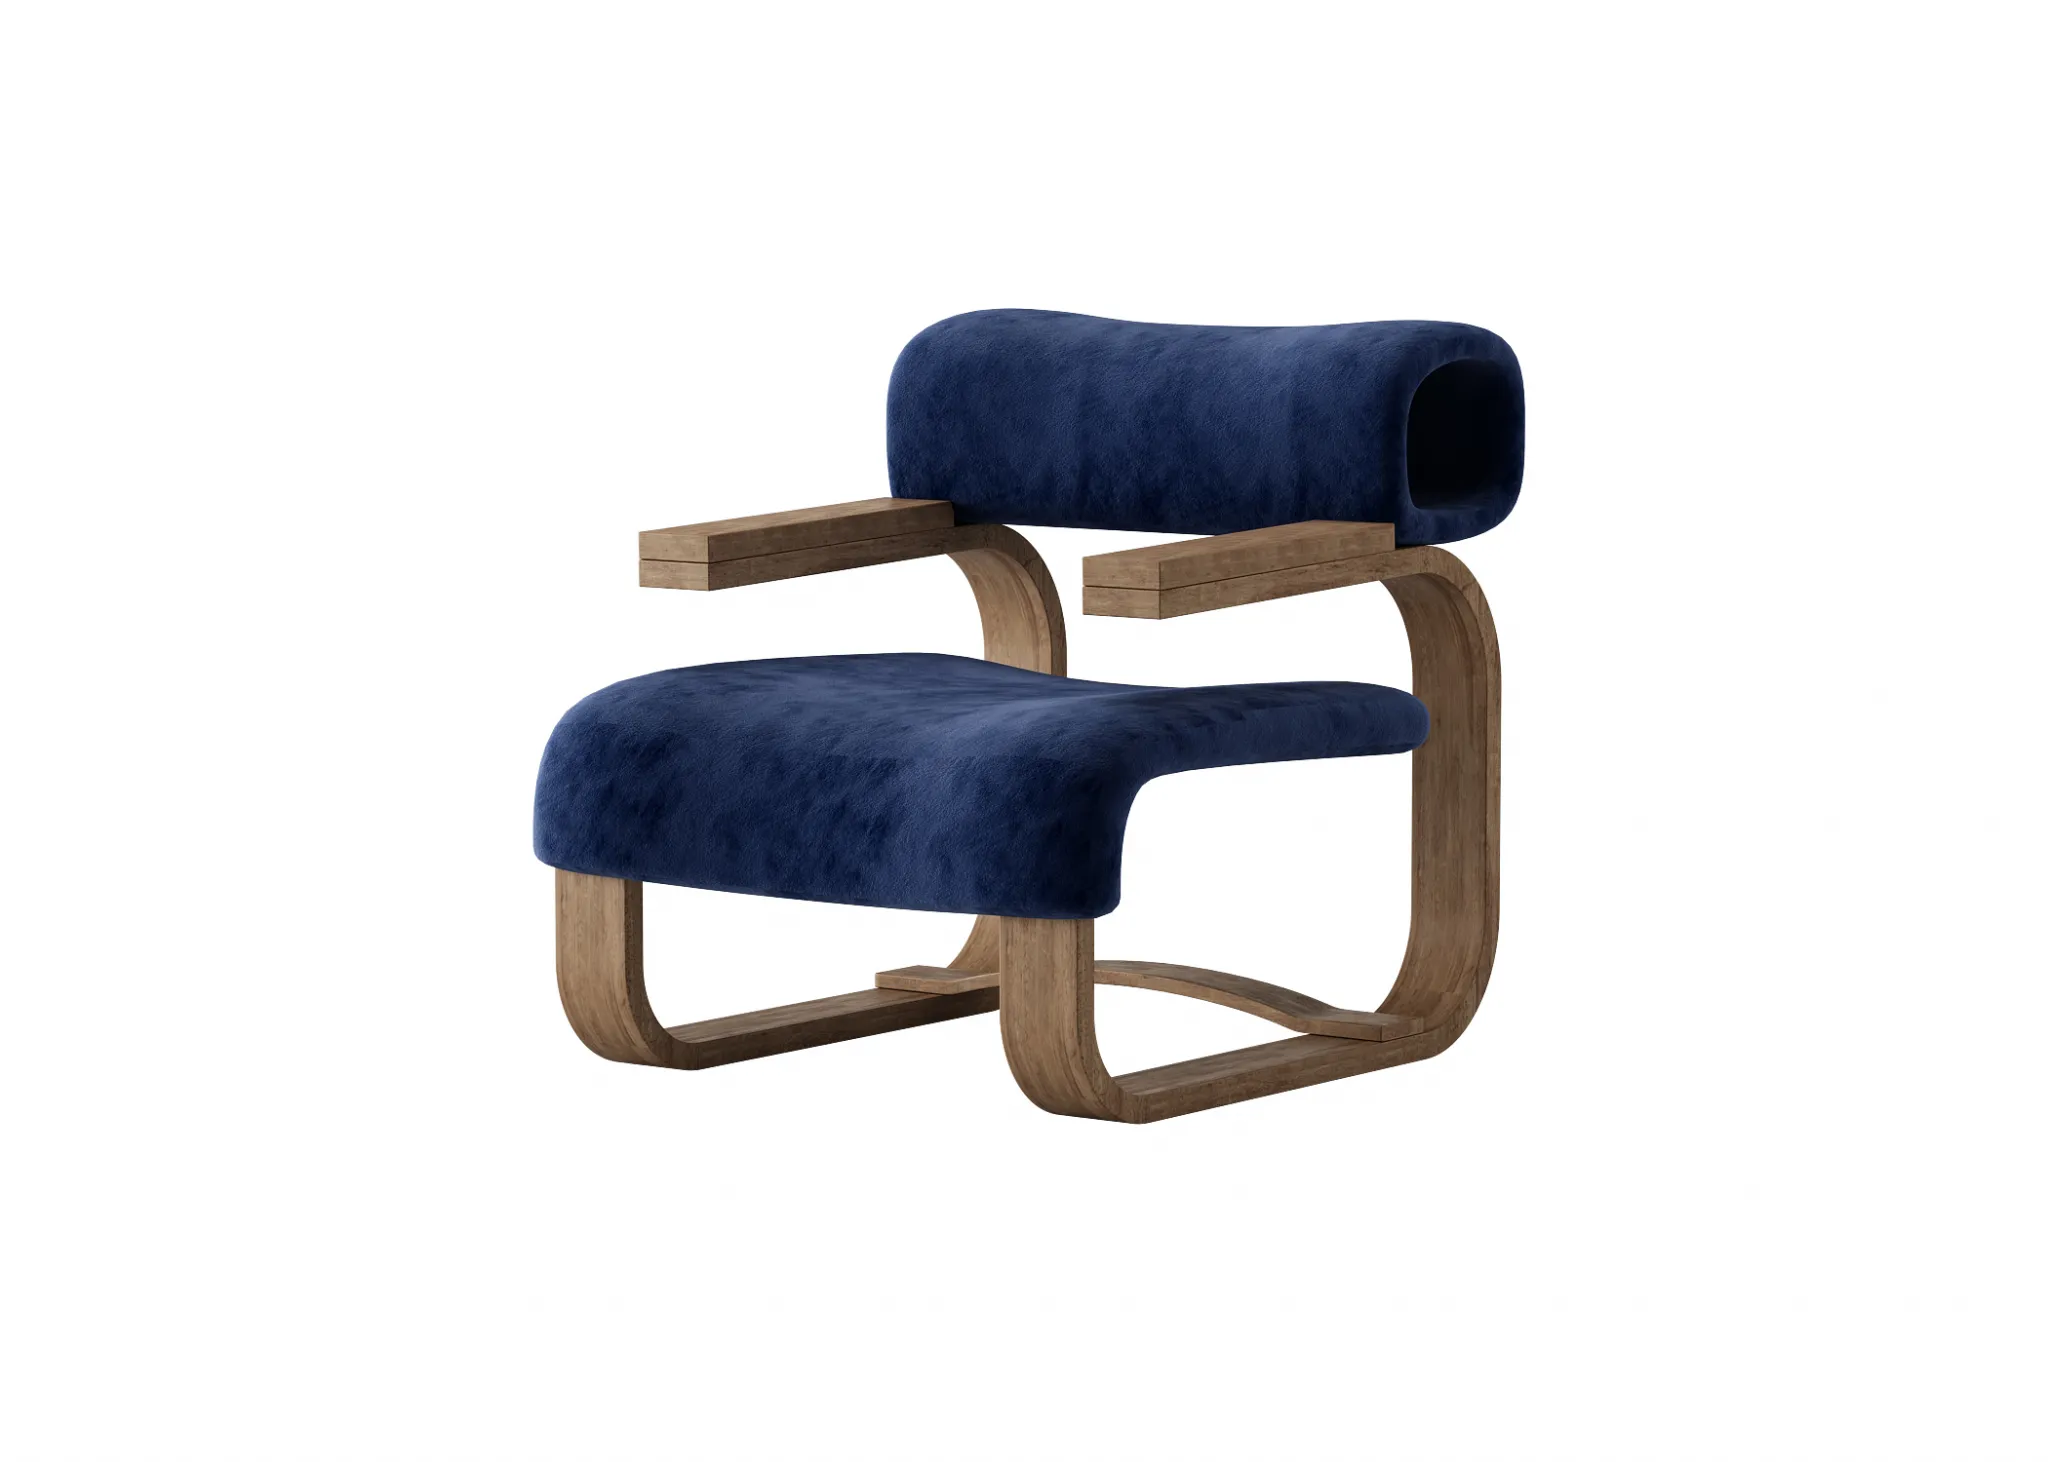 FURNITURE 3D MODELS – CHAIRS – 0502